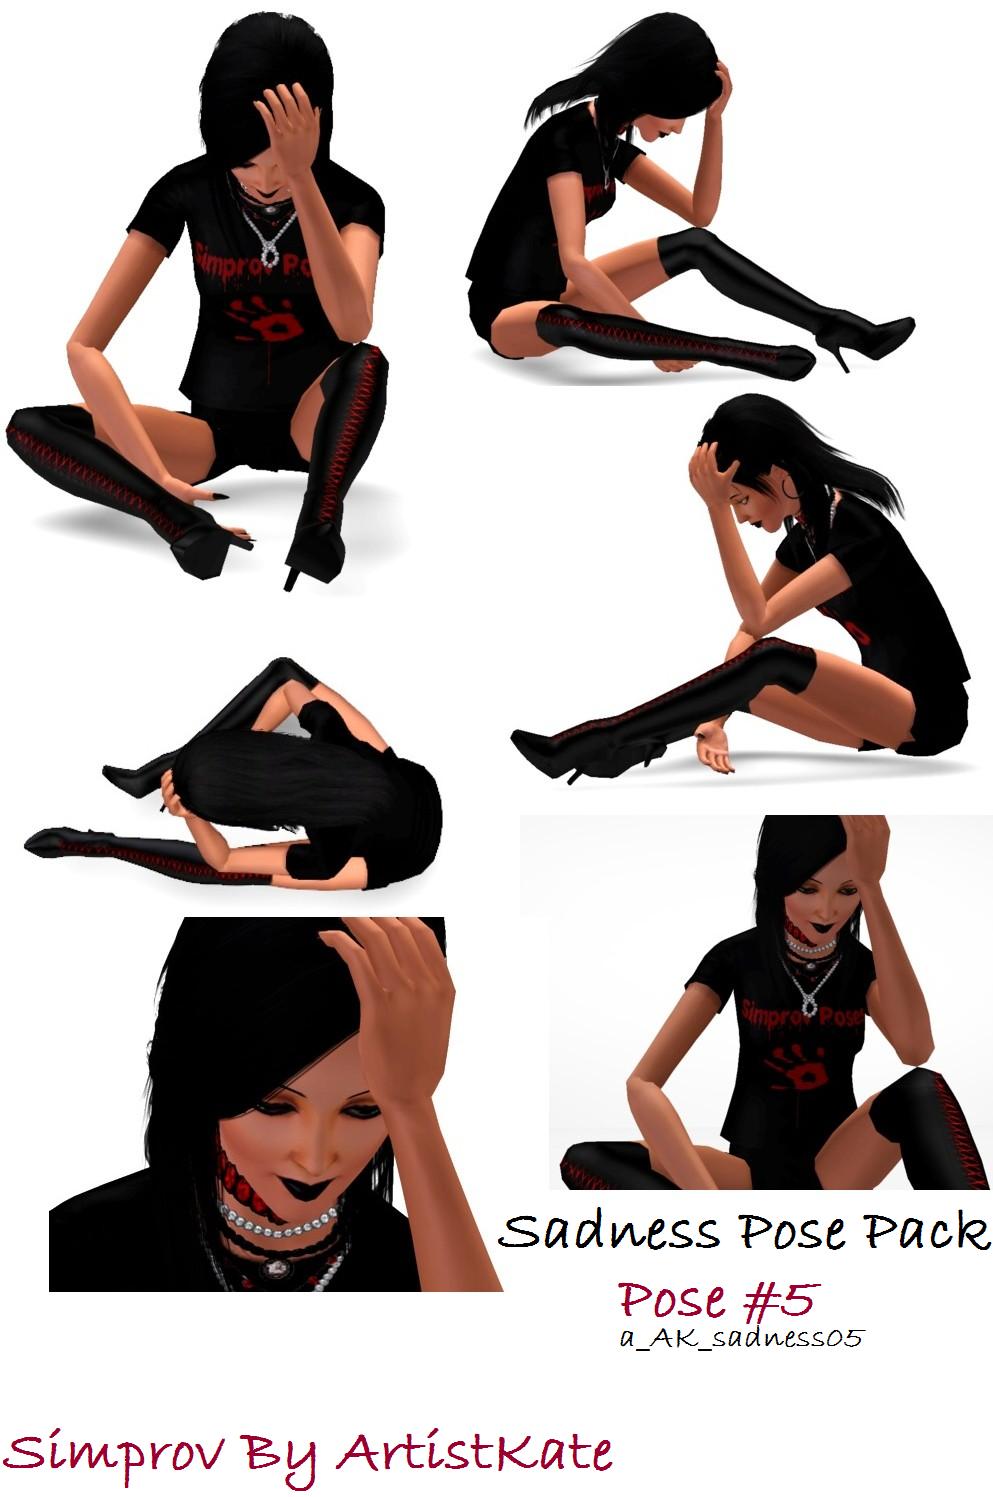 Sims 3 Sitting Poses On Floor